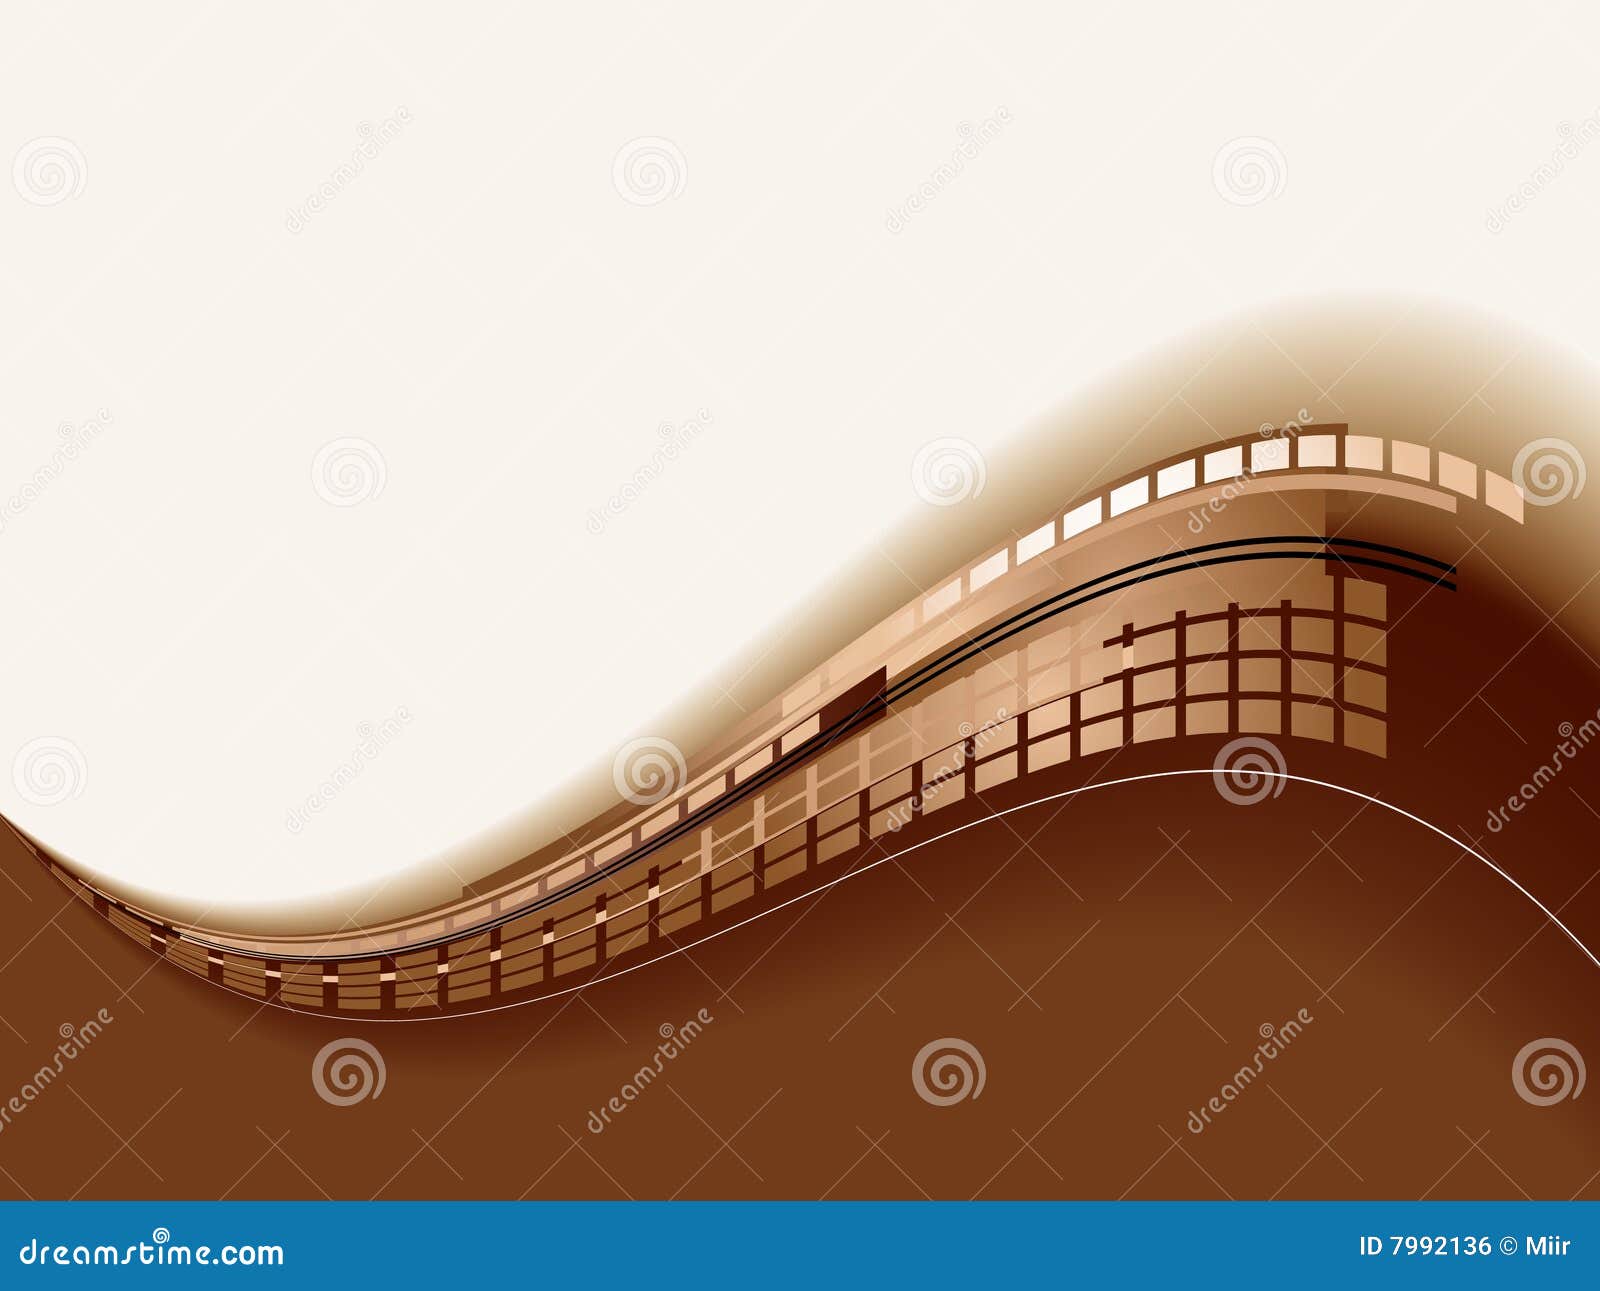 Brown and white background stock vector. Illustration of design - 7992136